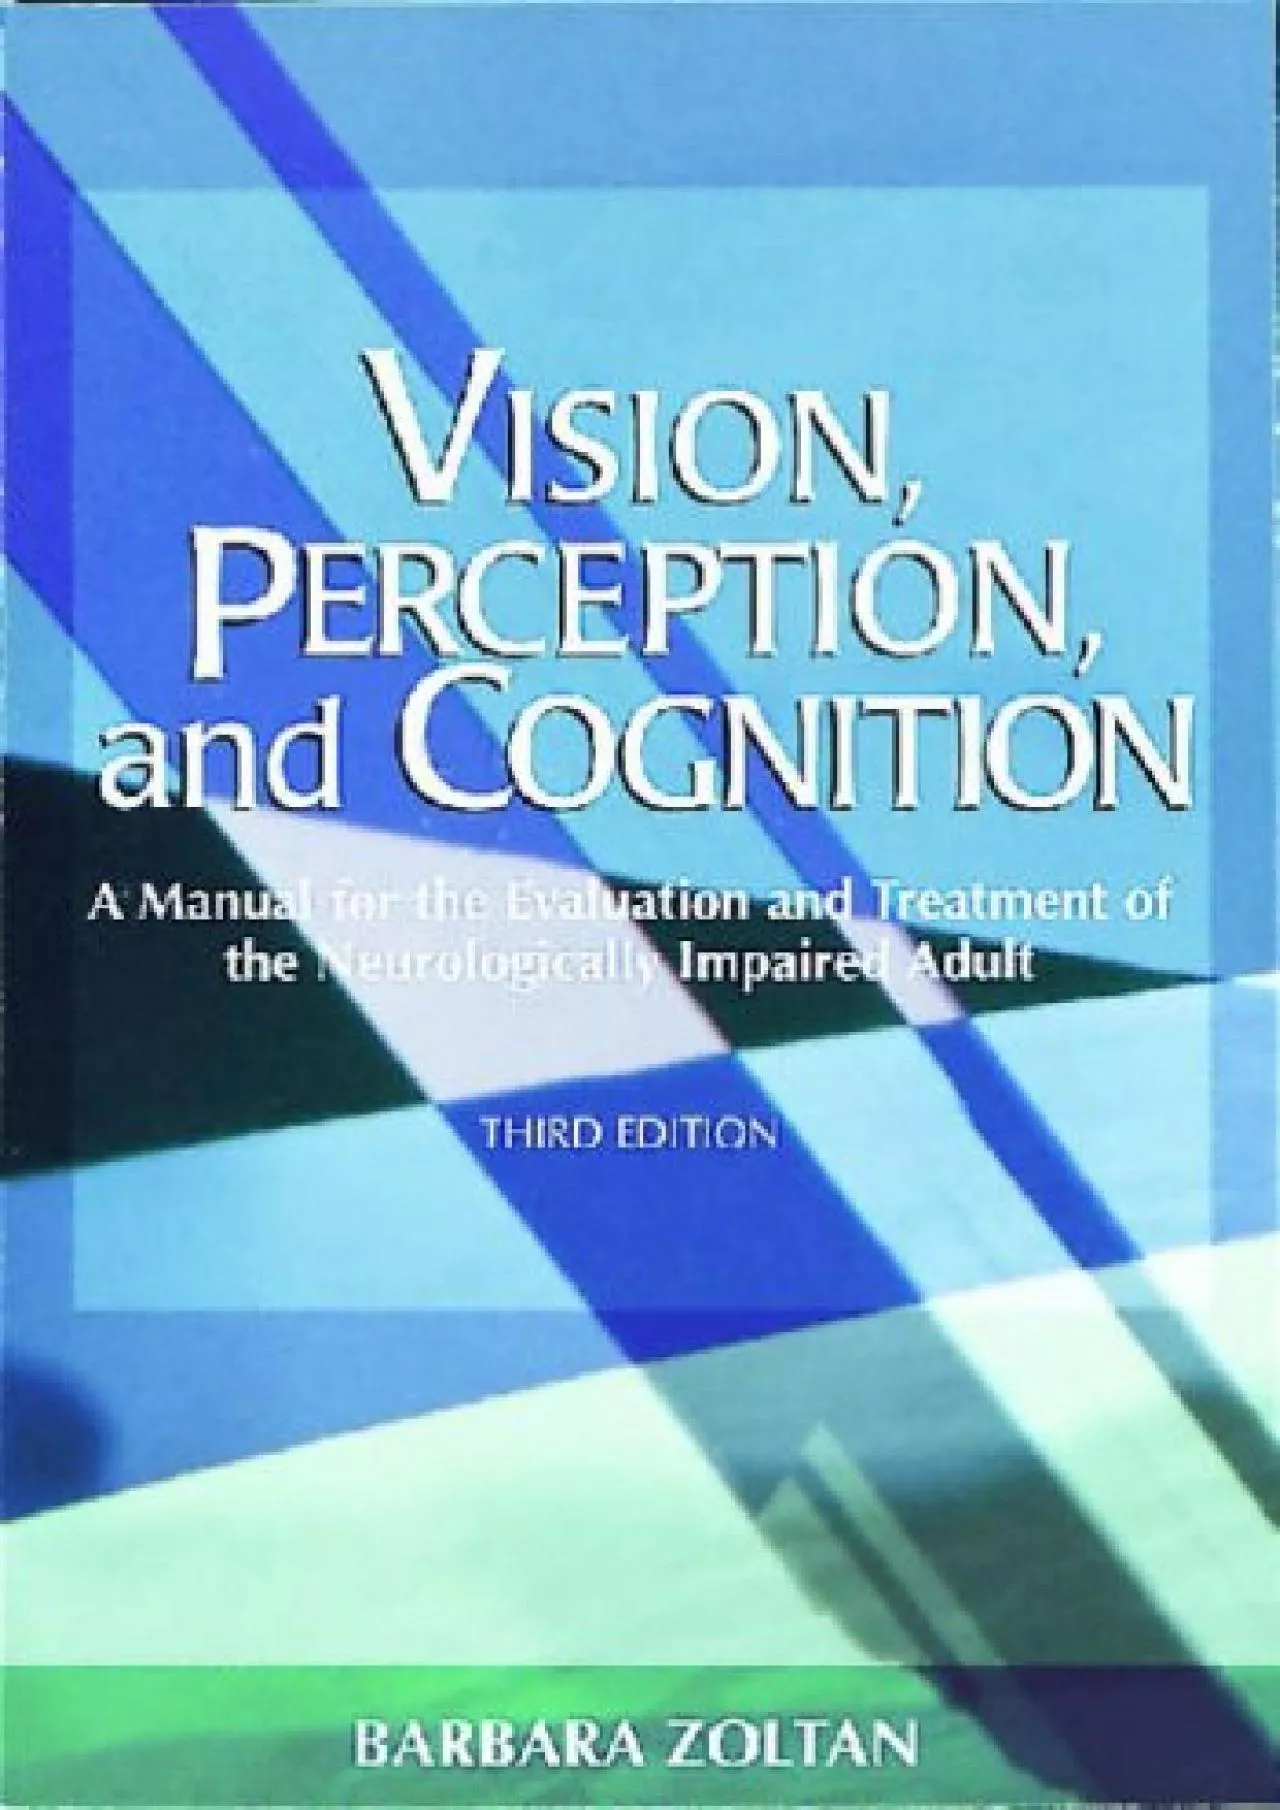 (BOOS)-Vision, Perception, and Cognition: A Manual for the Evaluation and Treatment of